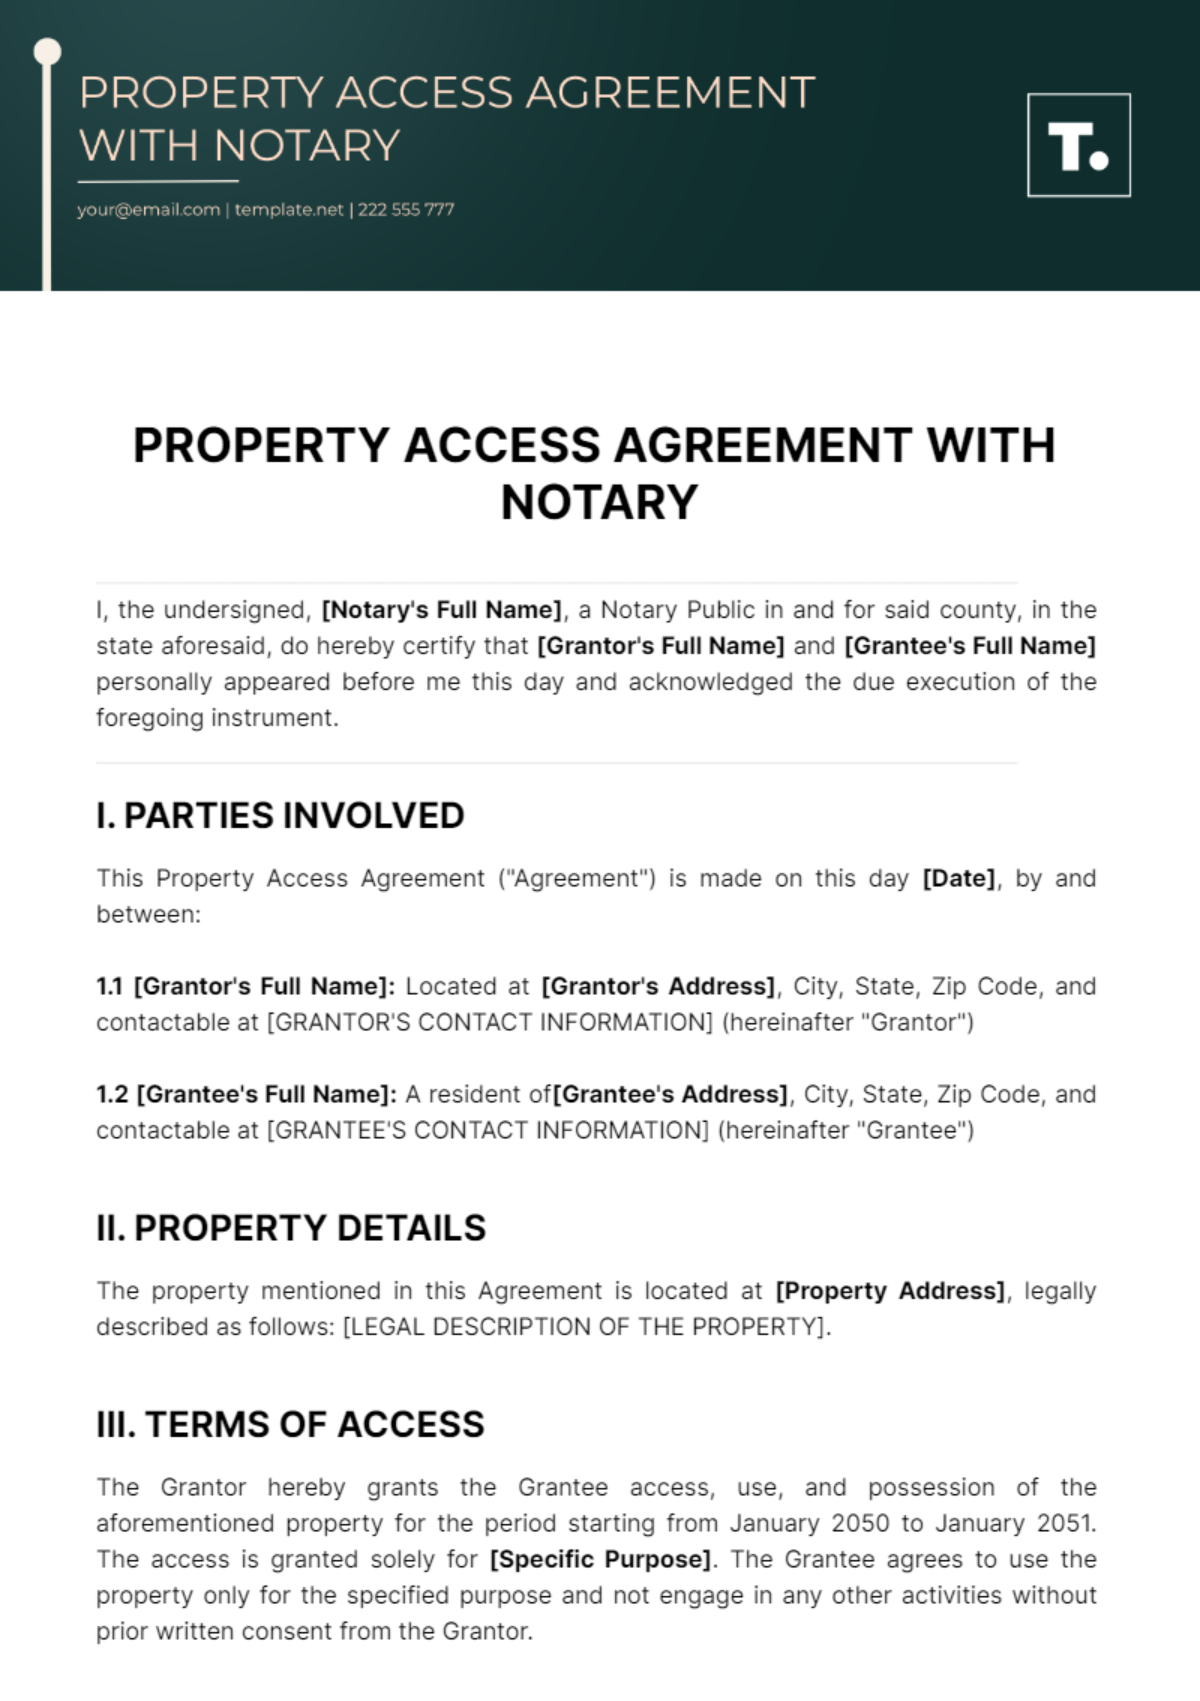 Free Property Access Agreement With Notary Template